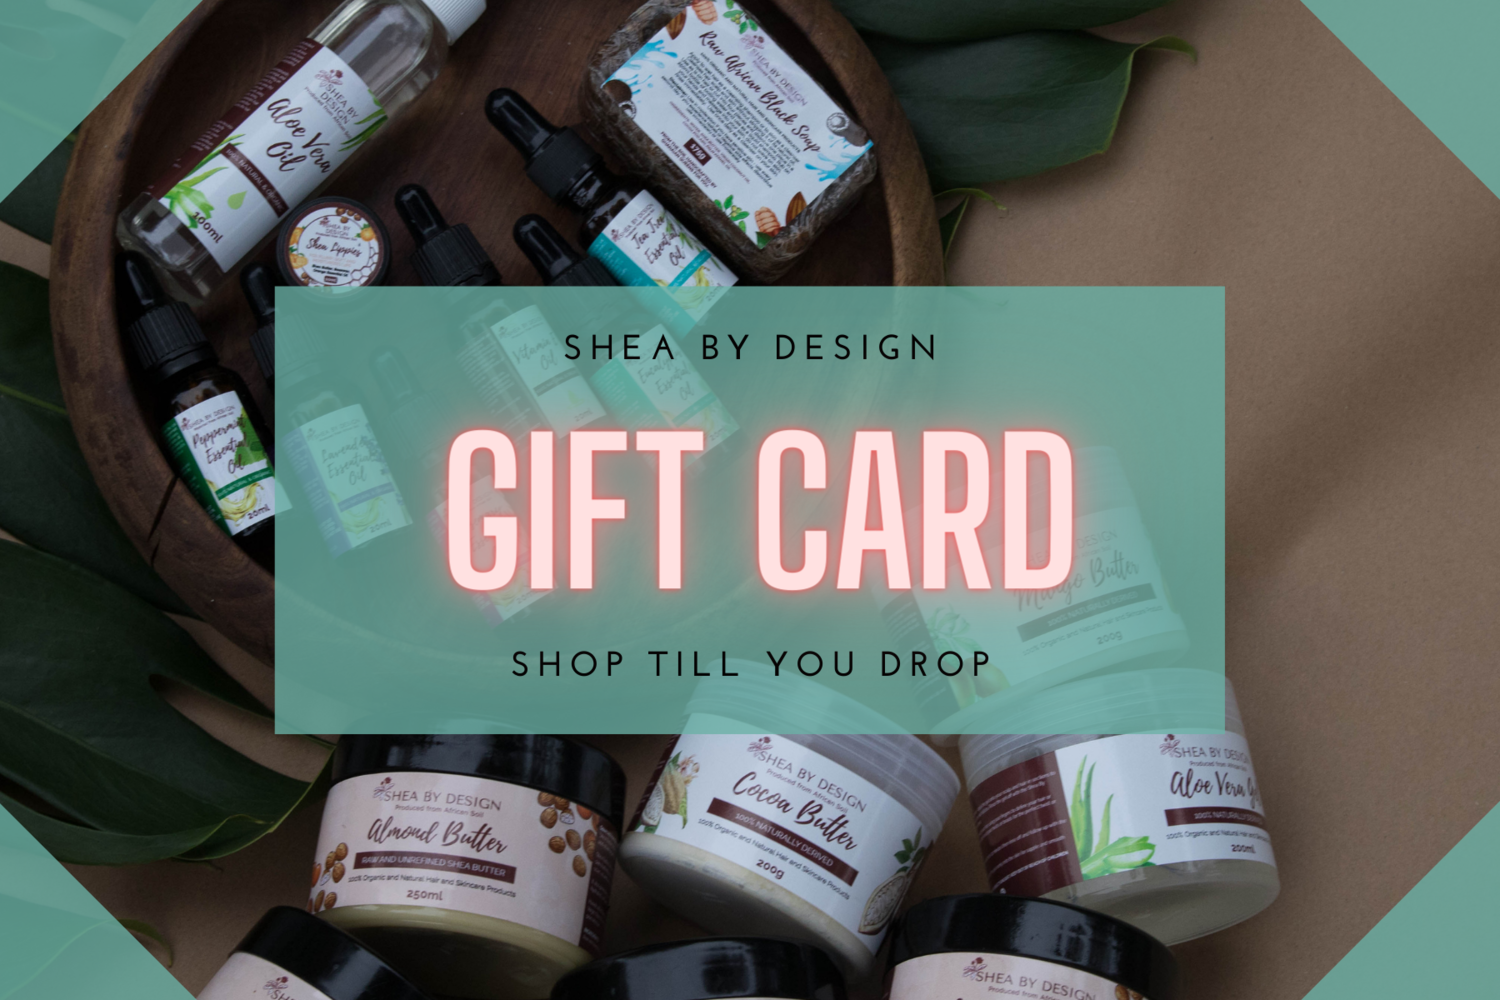 Gift Card - Shea by Design